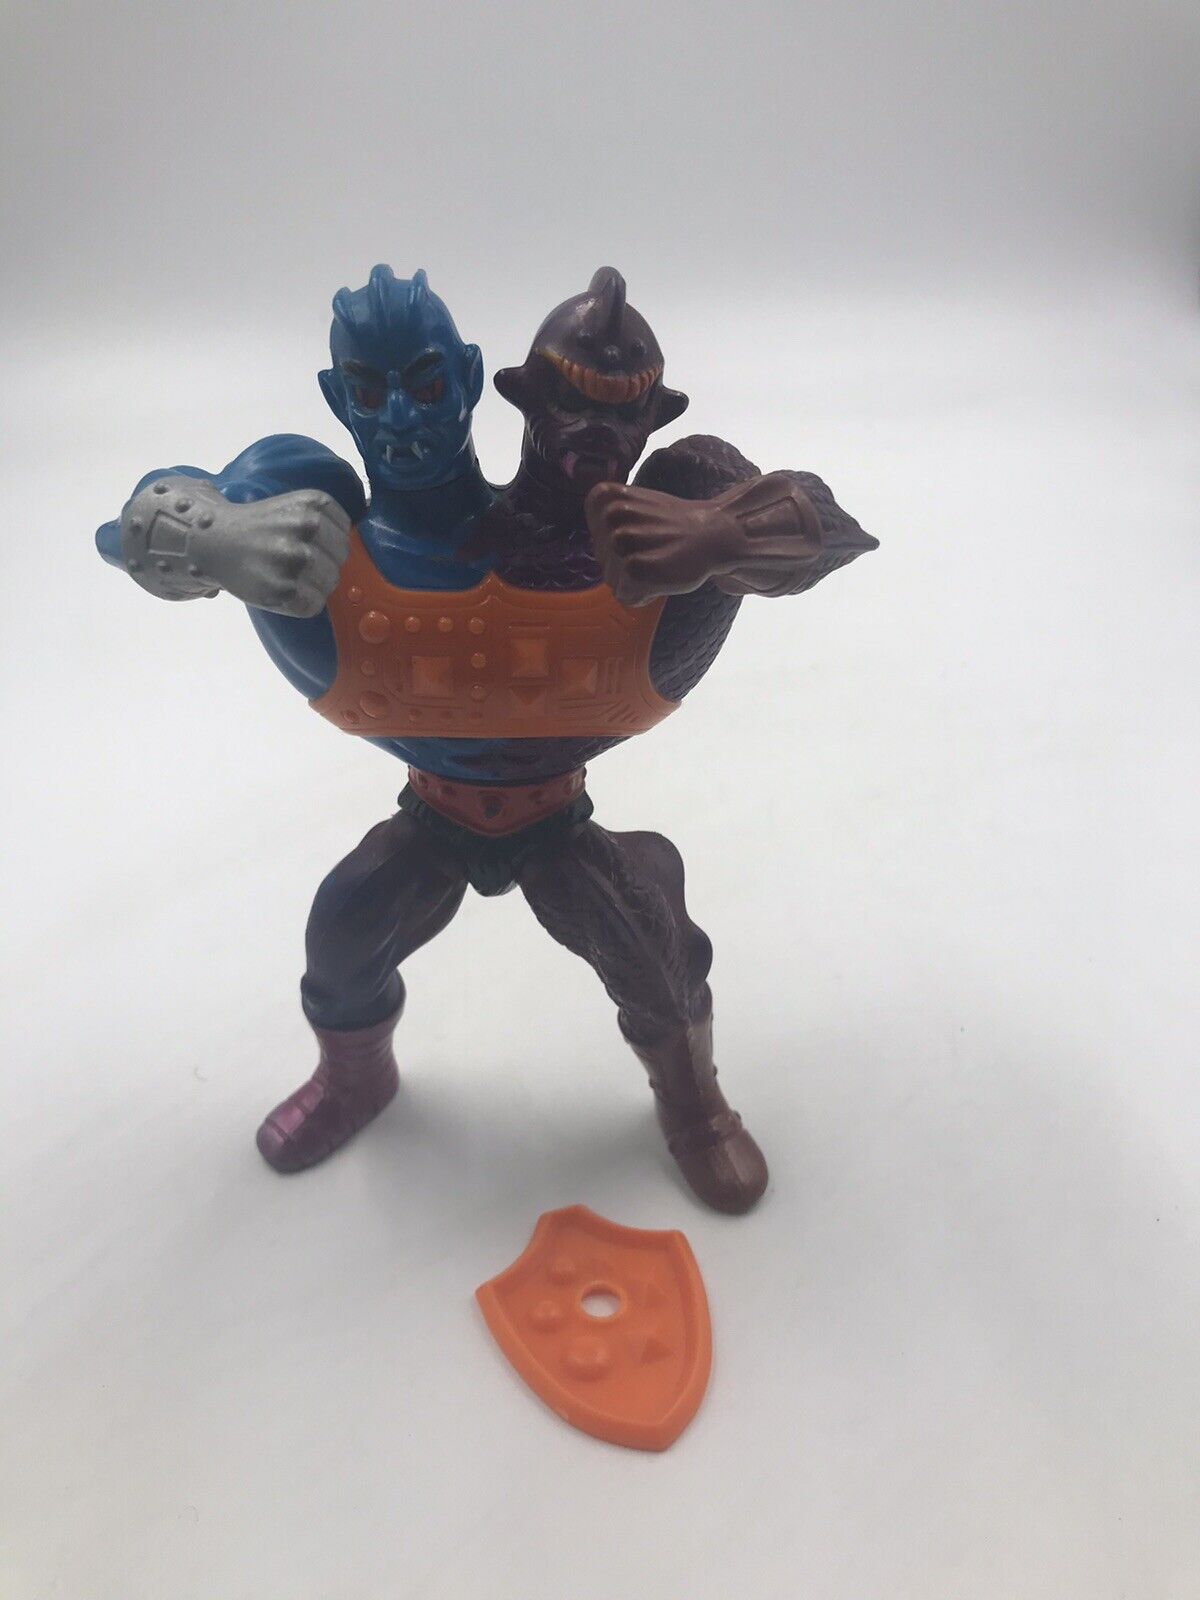 1984 He-Man Two Bad Motu Action Figure Vintage Mattel Masters Of The Universe